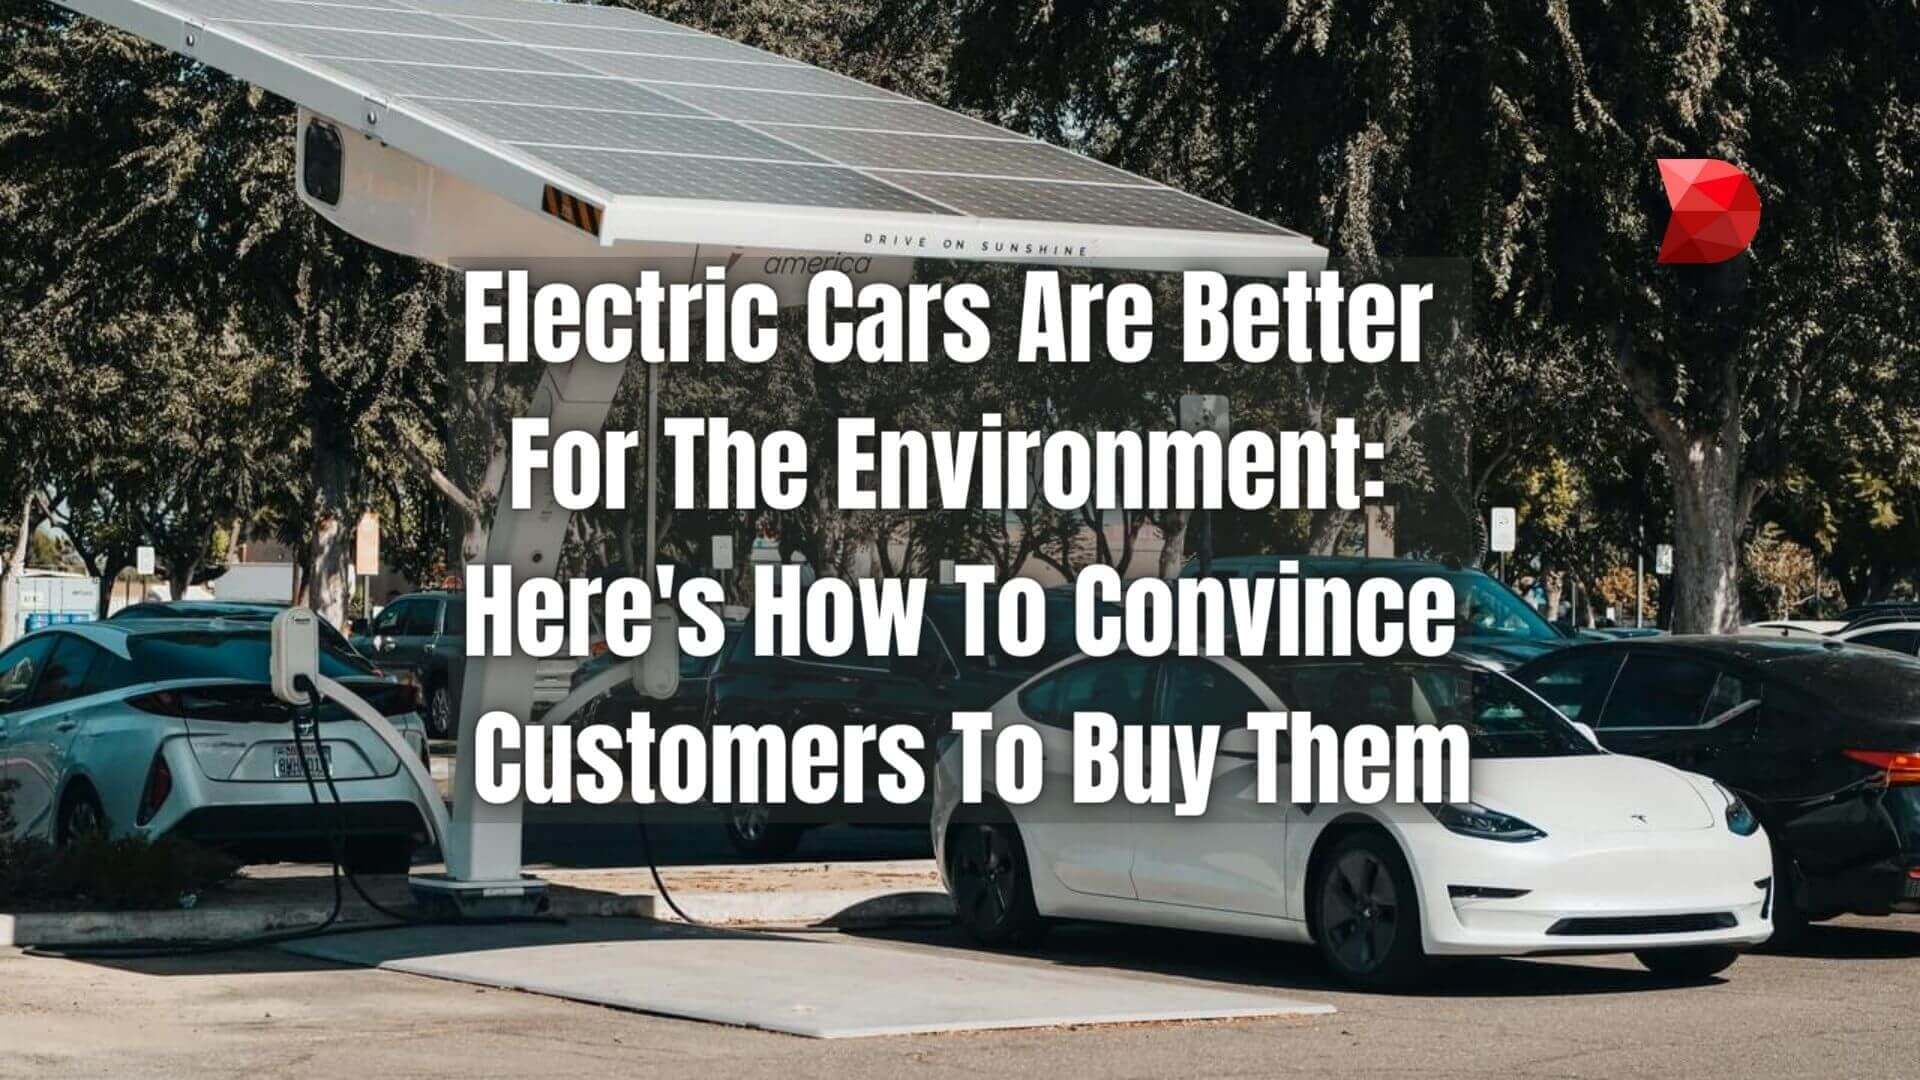 Electric Cars Are Better For The Environment Here's How To Convince Customers To Buy Them